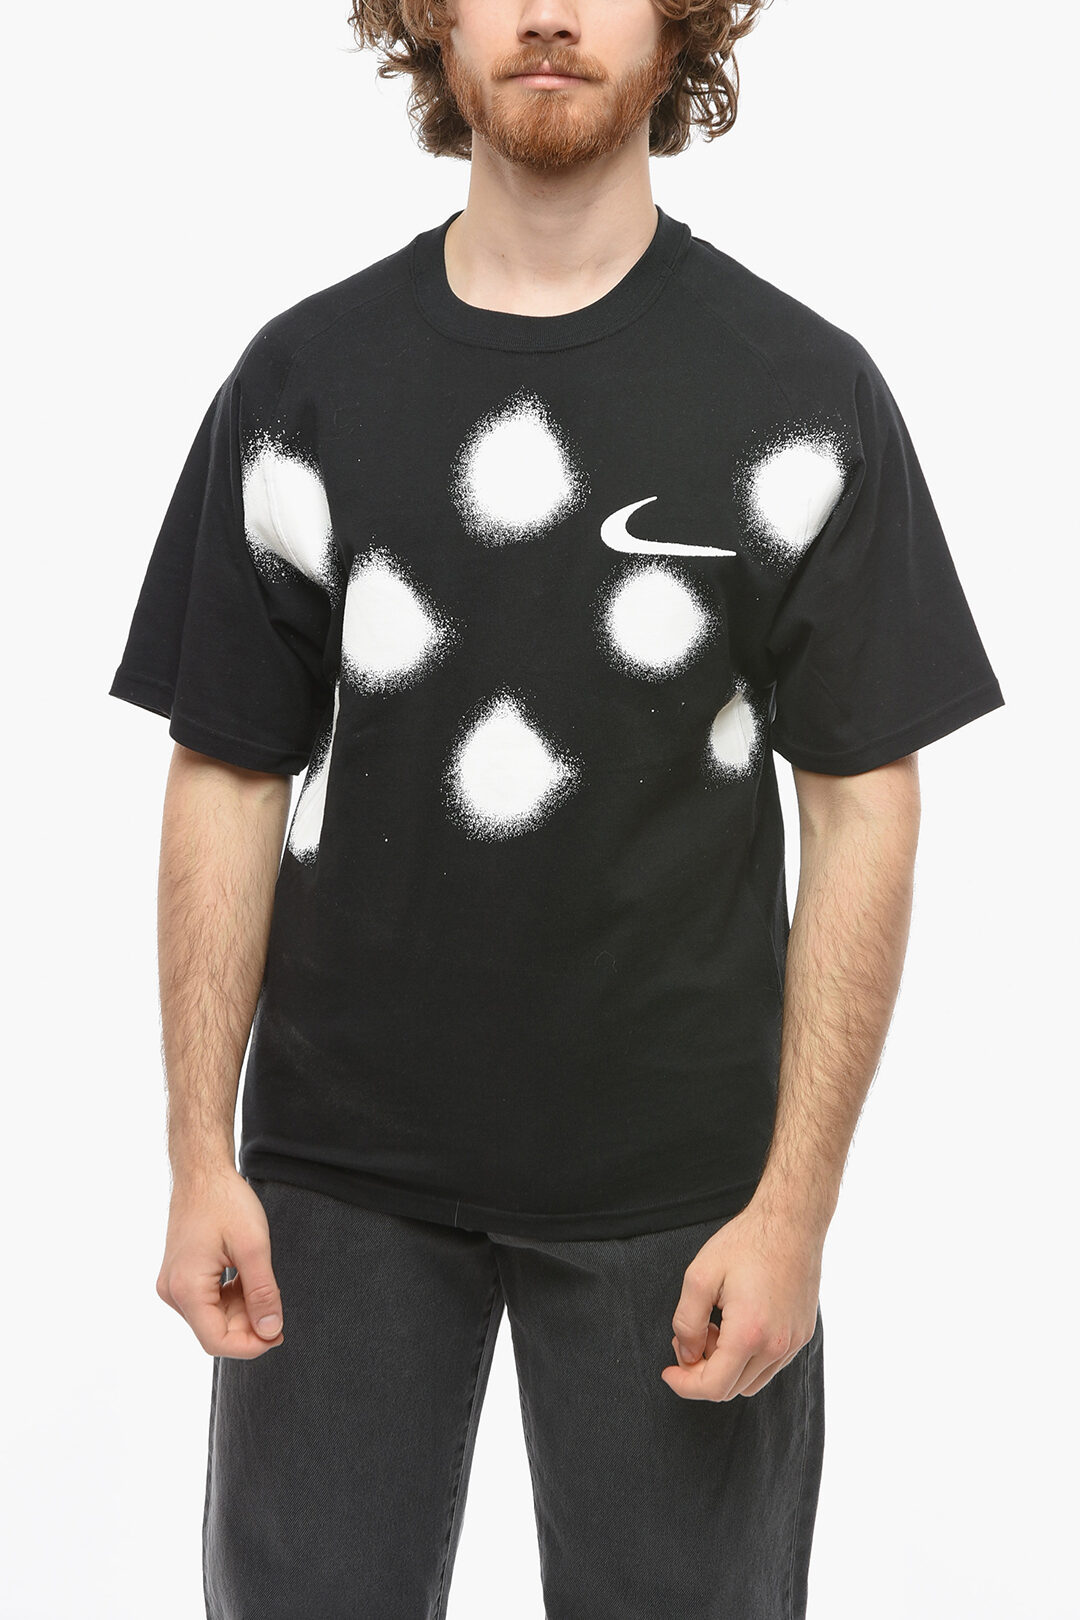 NIKE X Spray Printed Effect Crew-Neck T-shirt men - Glamood Outlet